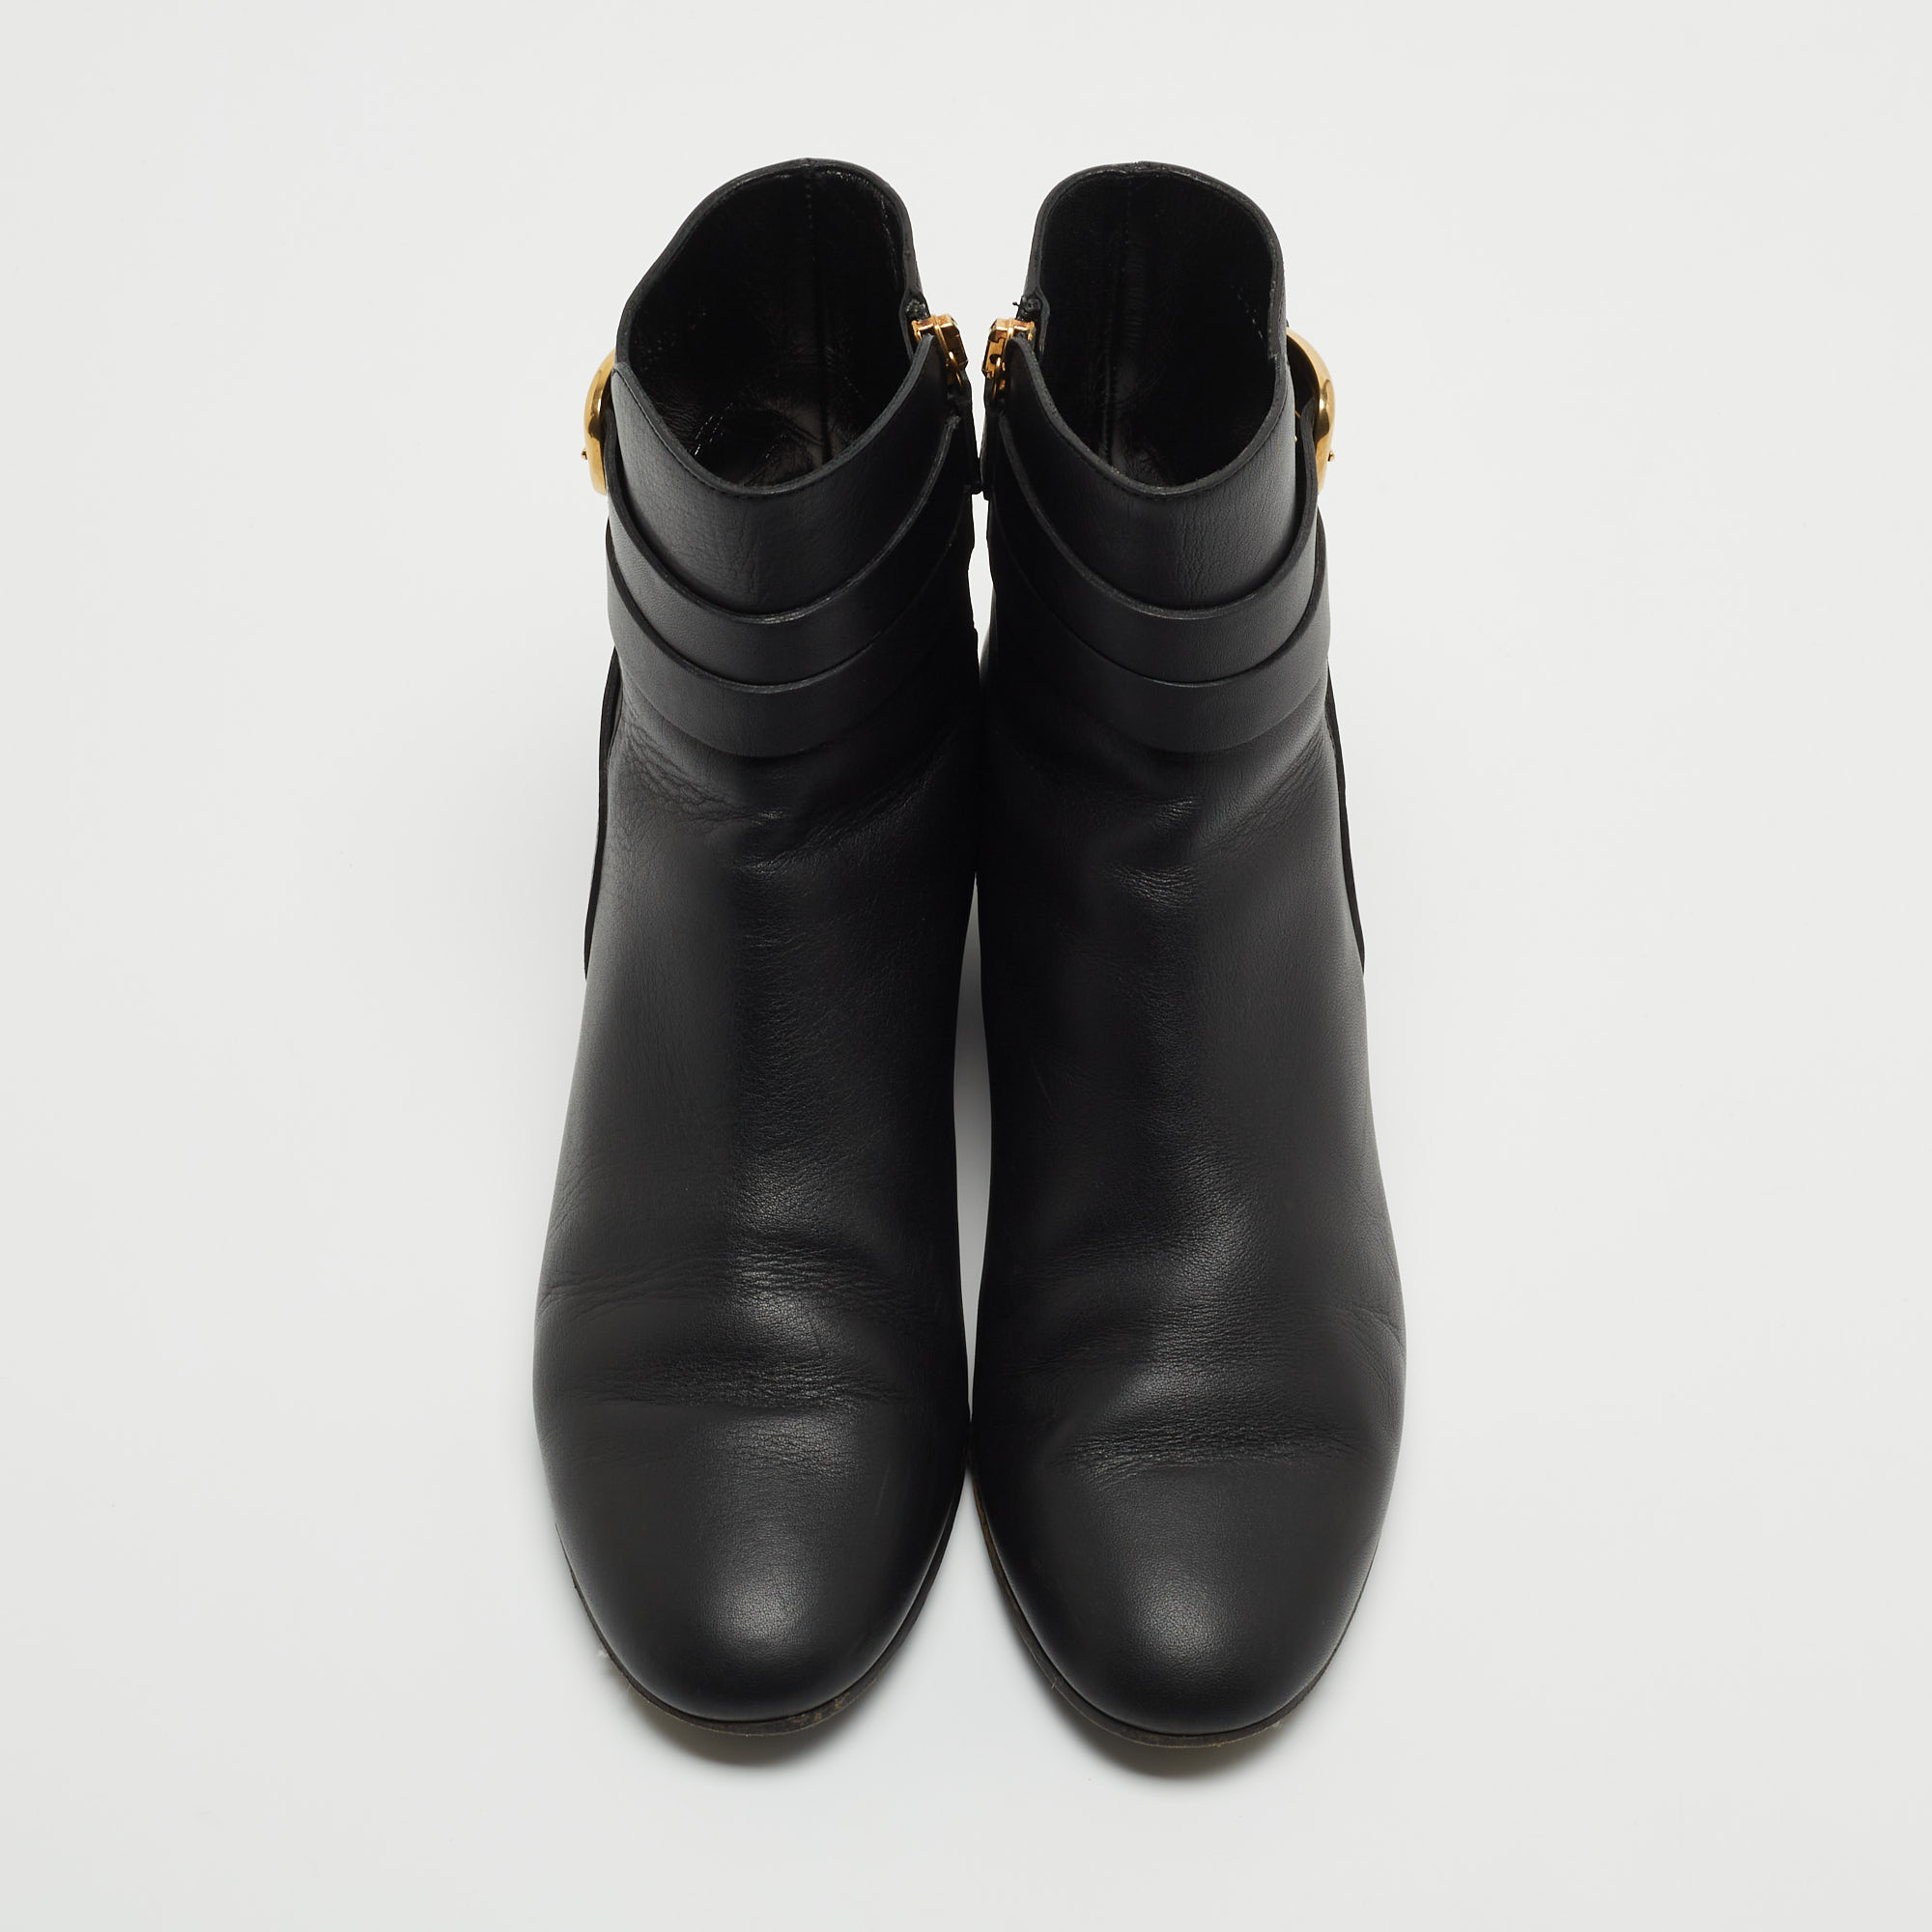 Gucci Black Leather Buckle Detail Ankle Booties Size 36.5